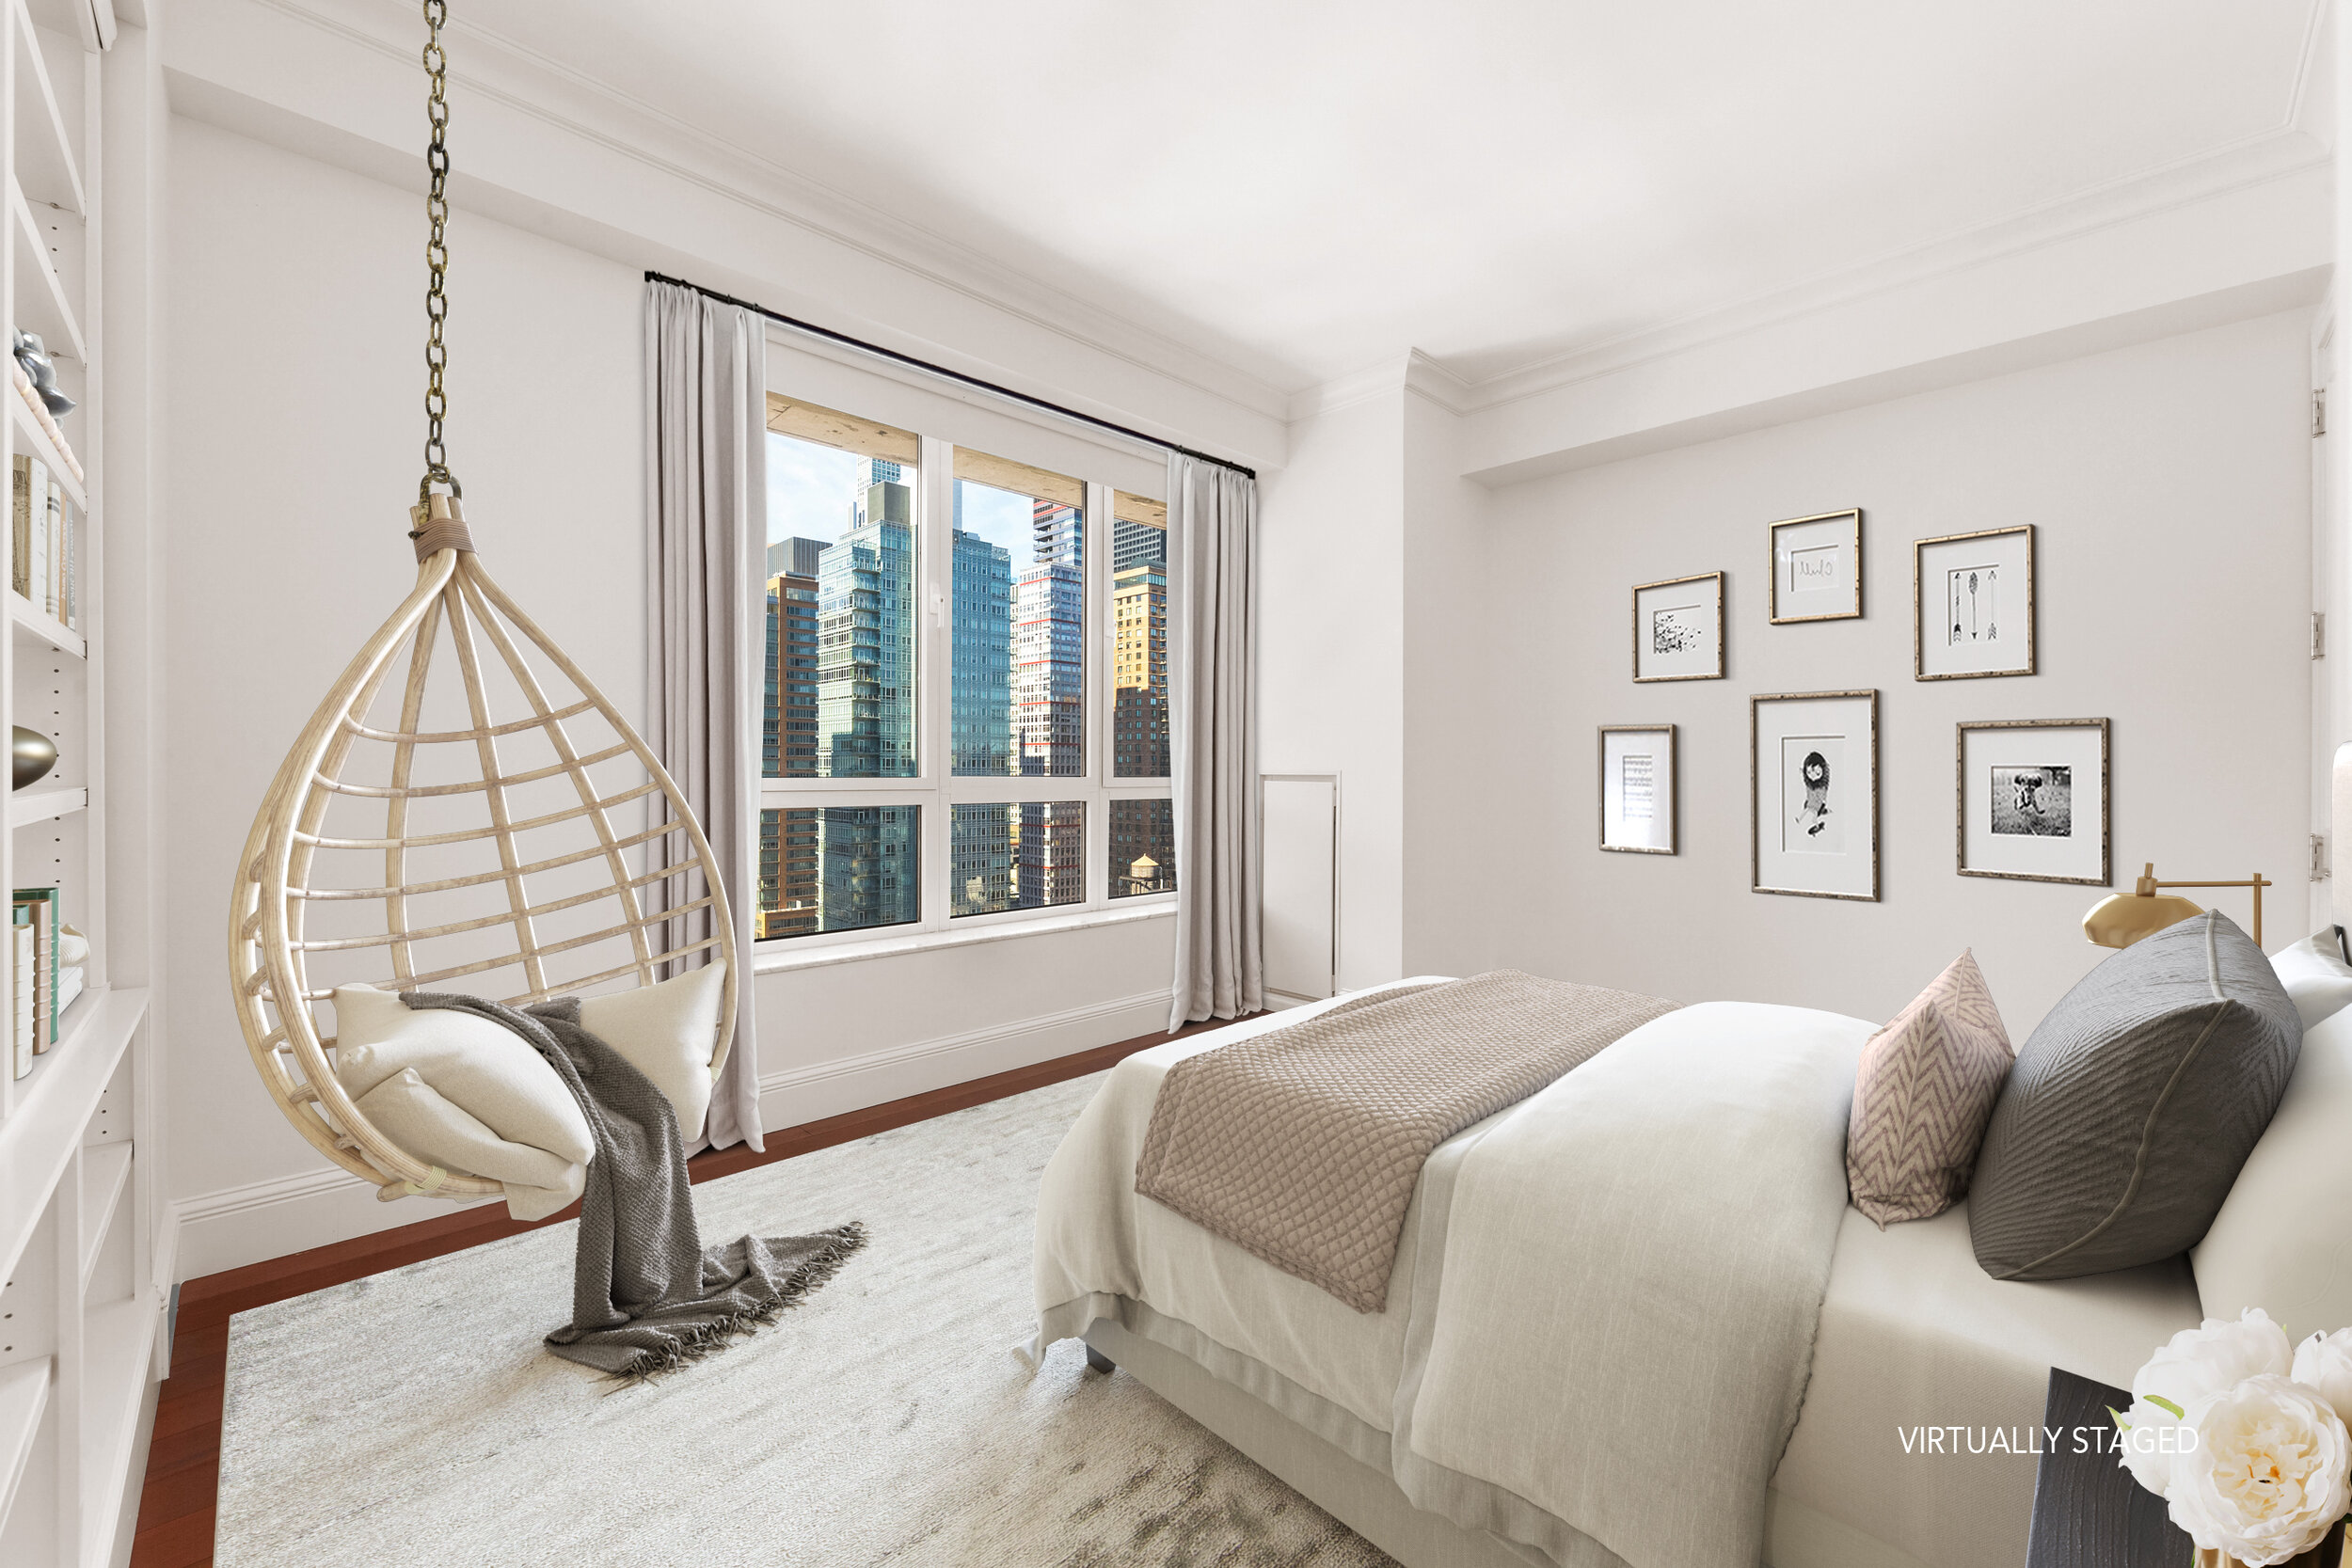  All residential interiors at The Beekman Regent boast herringbone hardwood flooring, wainscotting and detailed molding throughout, all consistent with the building’s history. With a prime location on the corner of East 51st Street and 1st Avenue, th